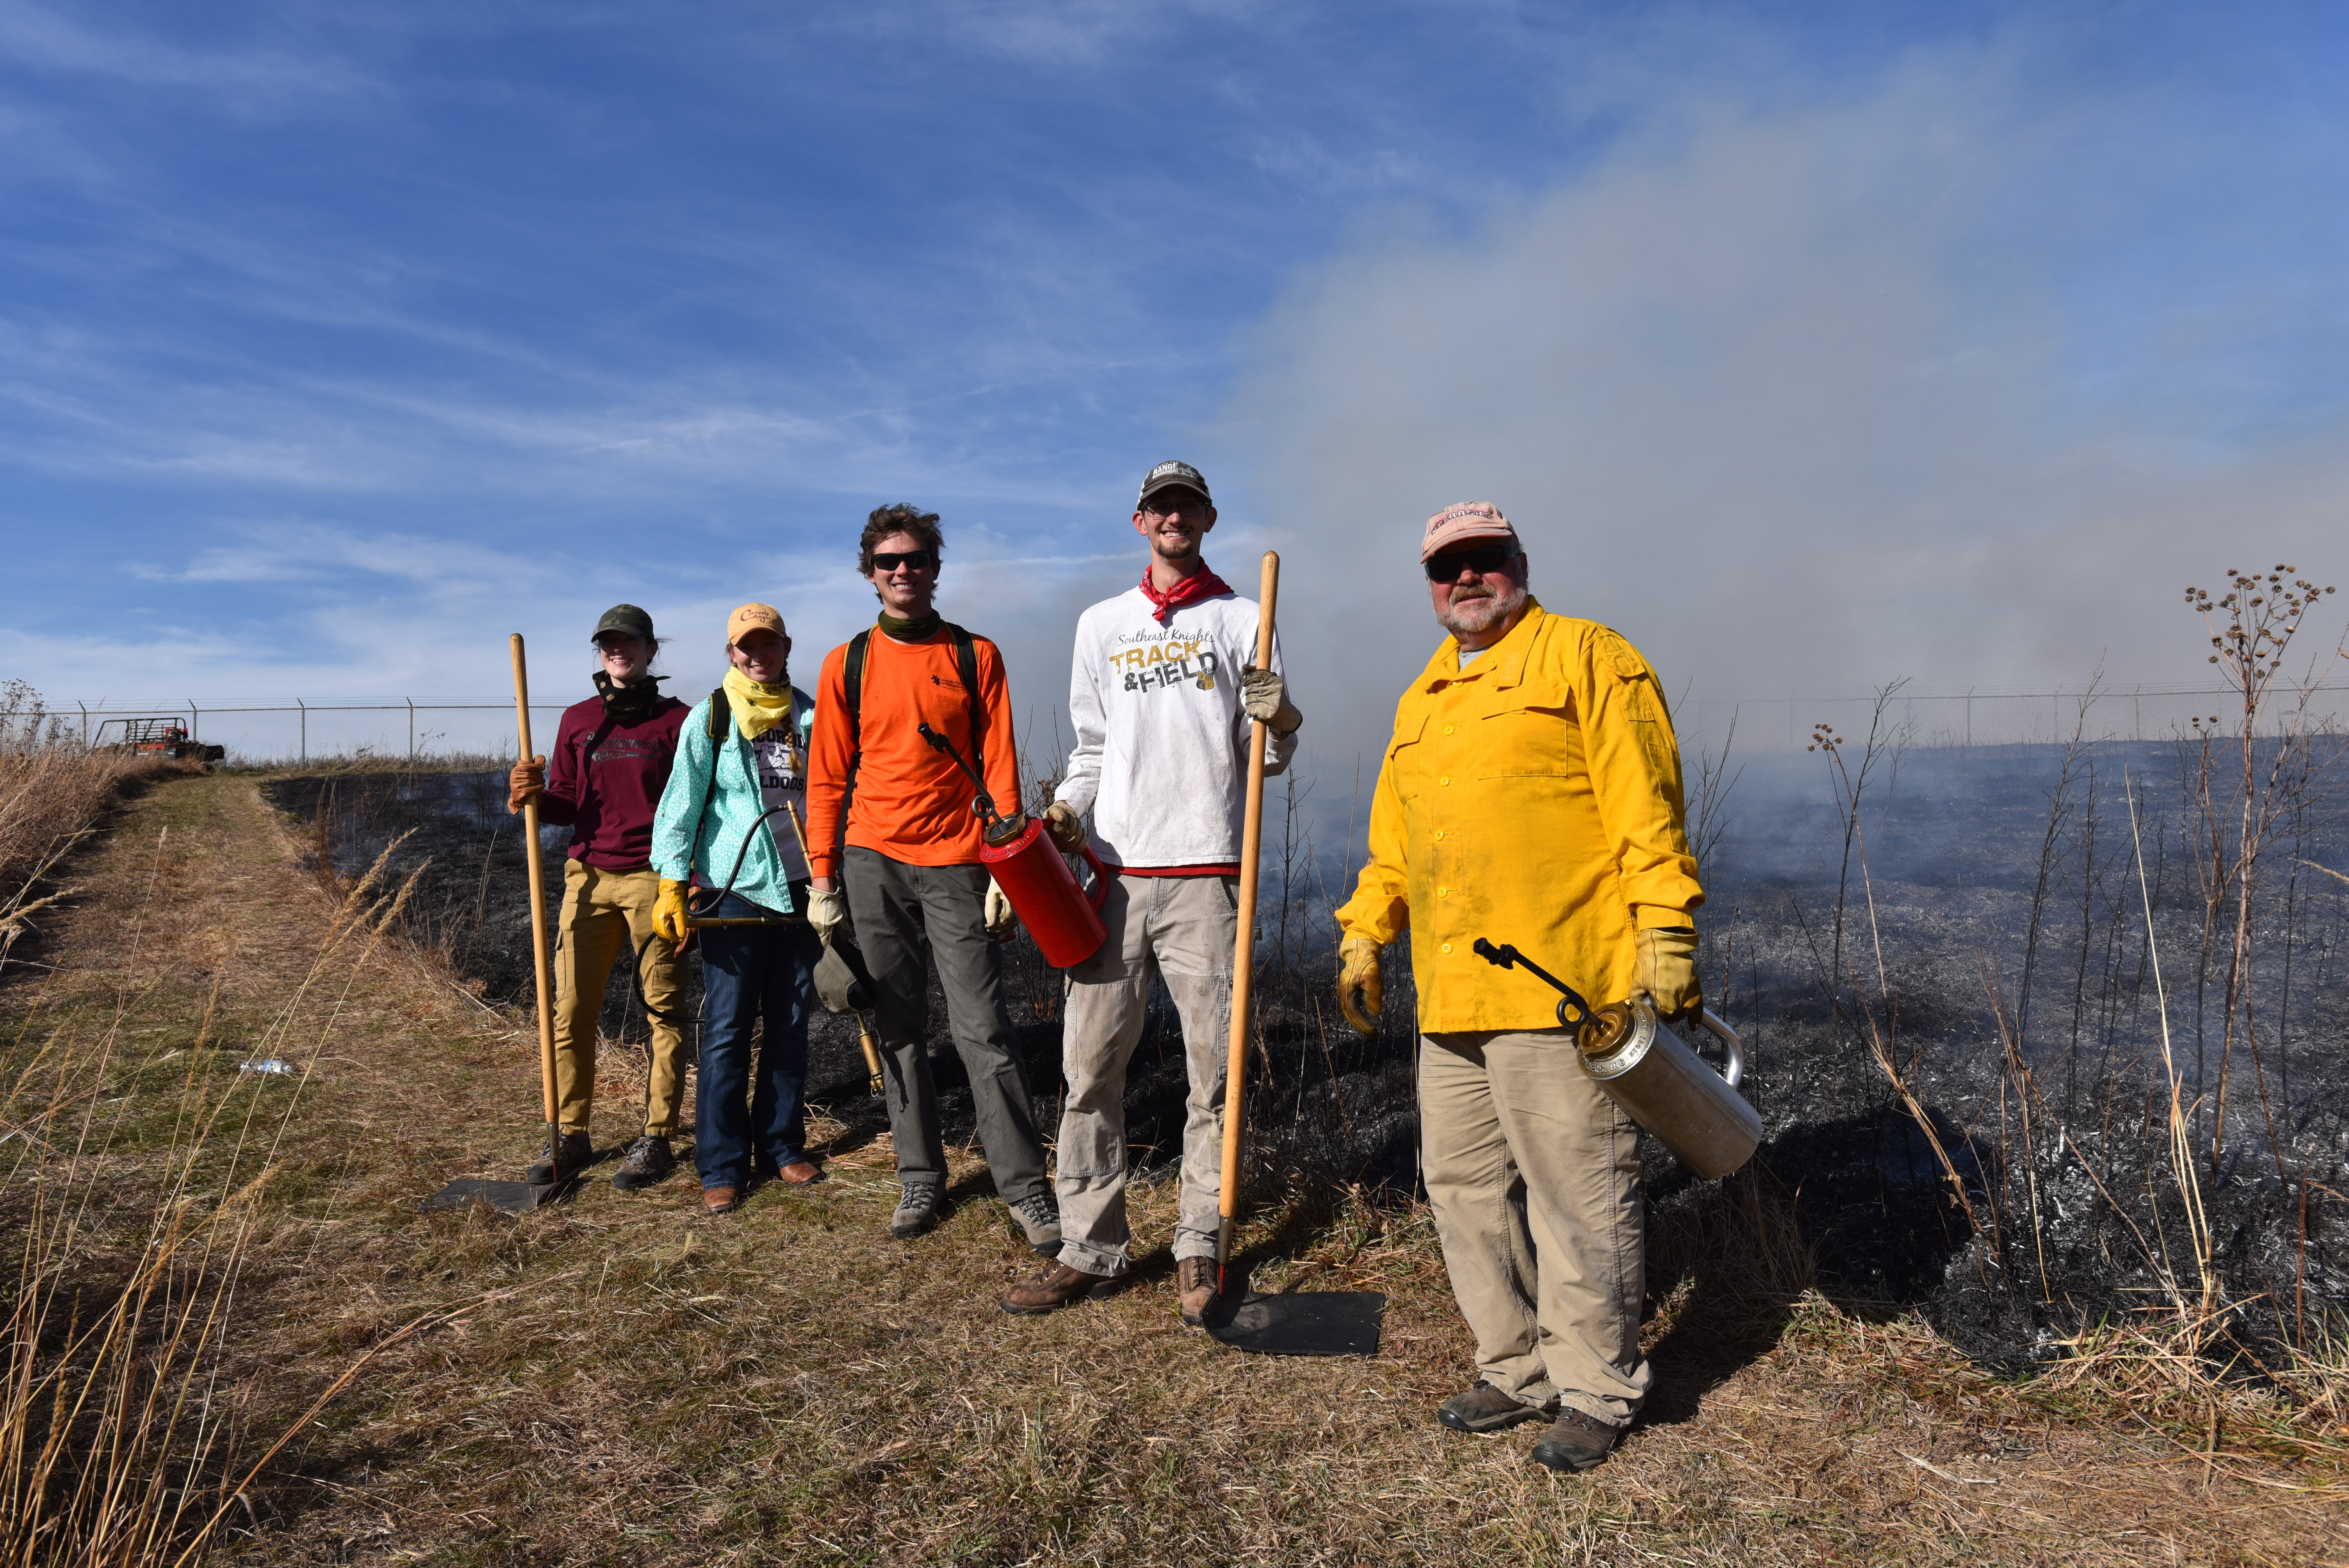 In November 2019, Dave Wedin, ecosystem ecologist from of SNR (right), conducted a prescribed fire demonstration at Nine-Mile Prairie with four students and one (not pictured) volunteer. | Shawna Richter-Ryerson, Natural Resources